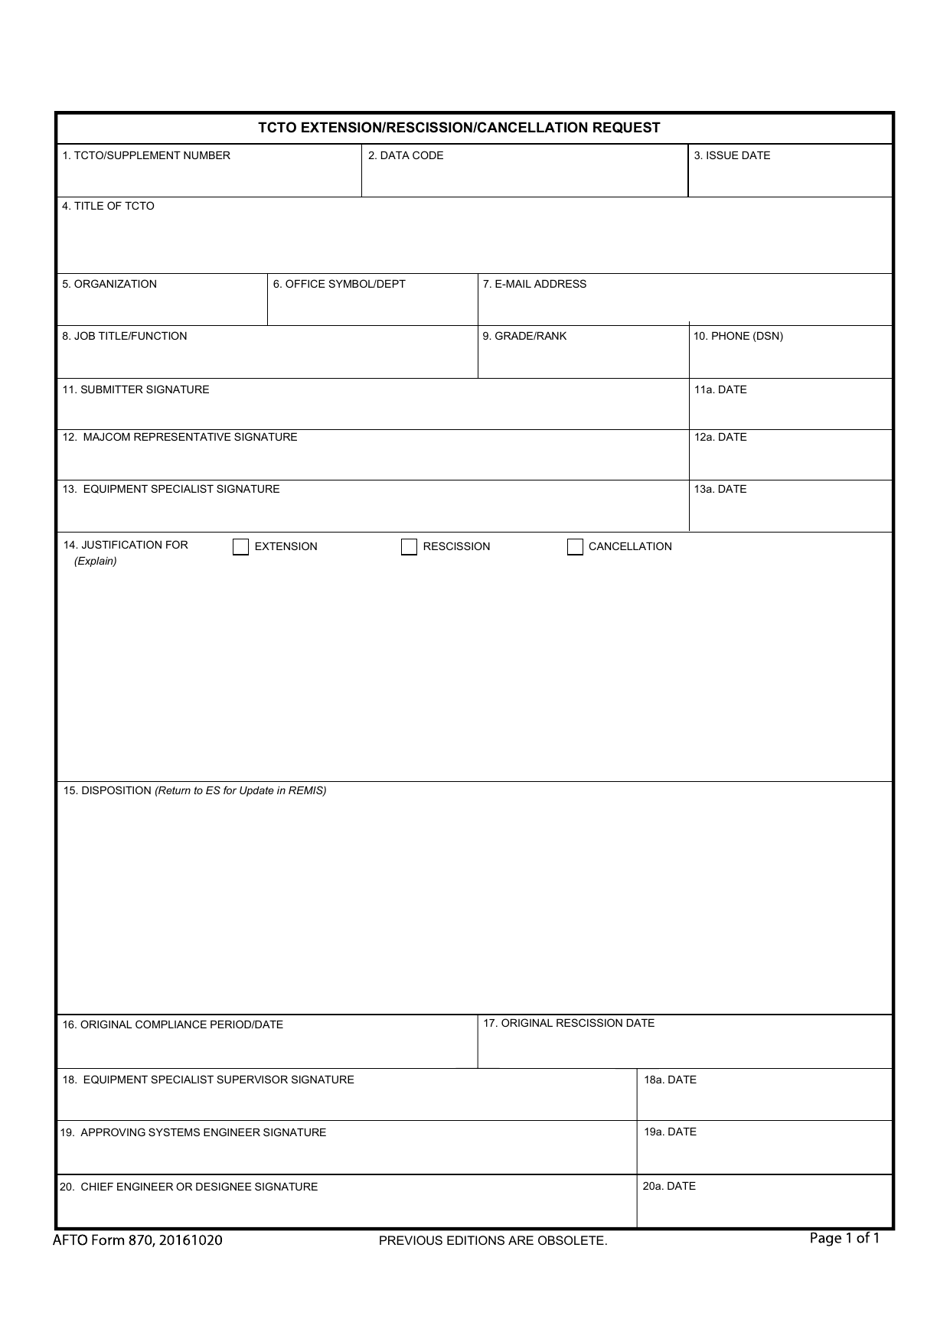 AFTO Form 870 Tcto Extension / Rescission / Cancellation Request, Page 1